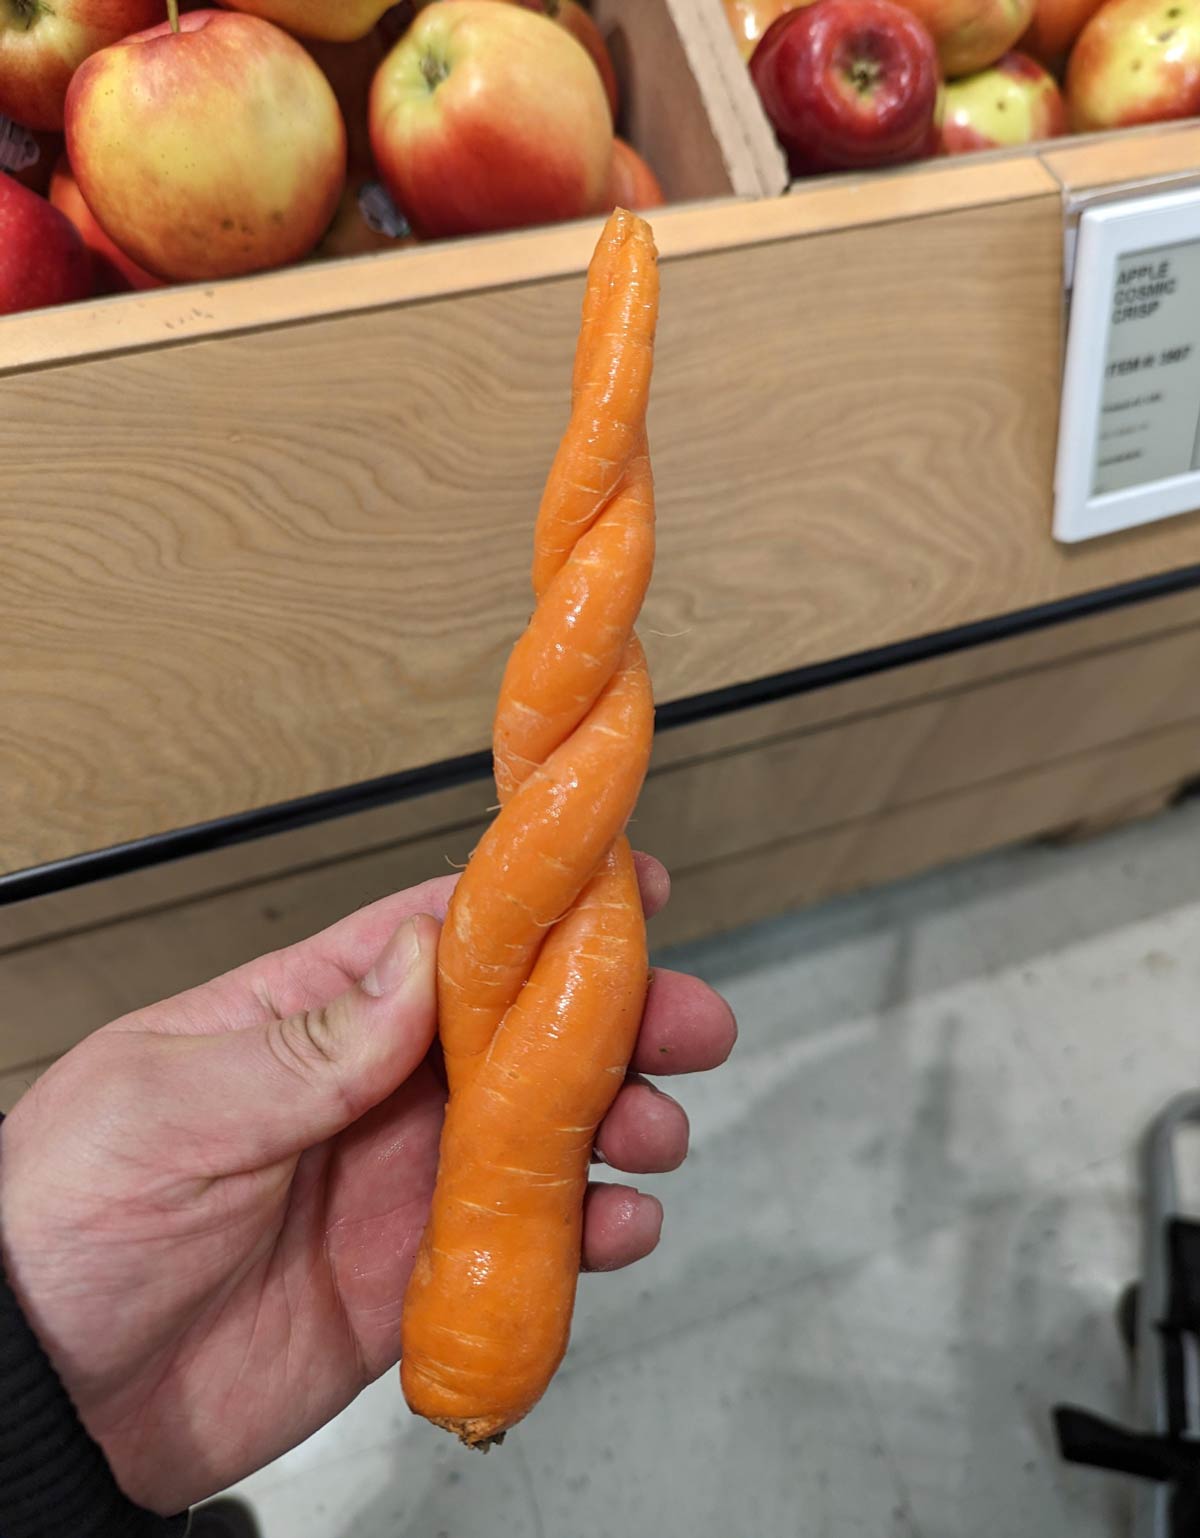 This twisted carrot